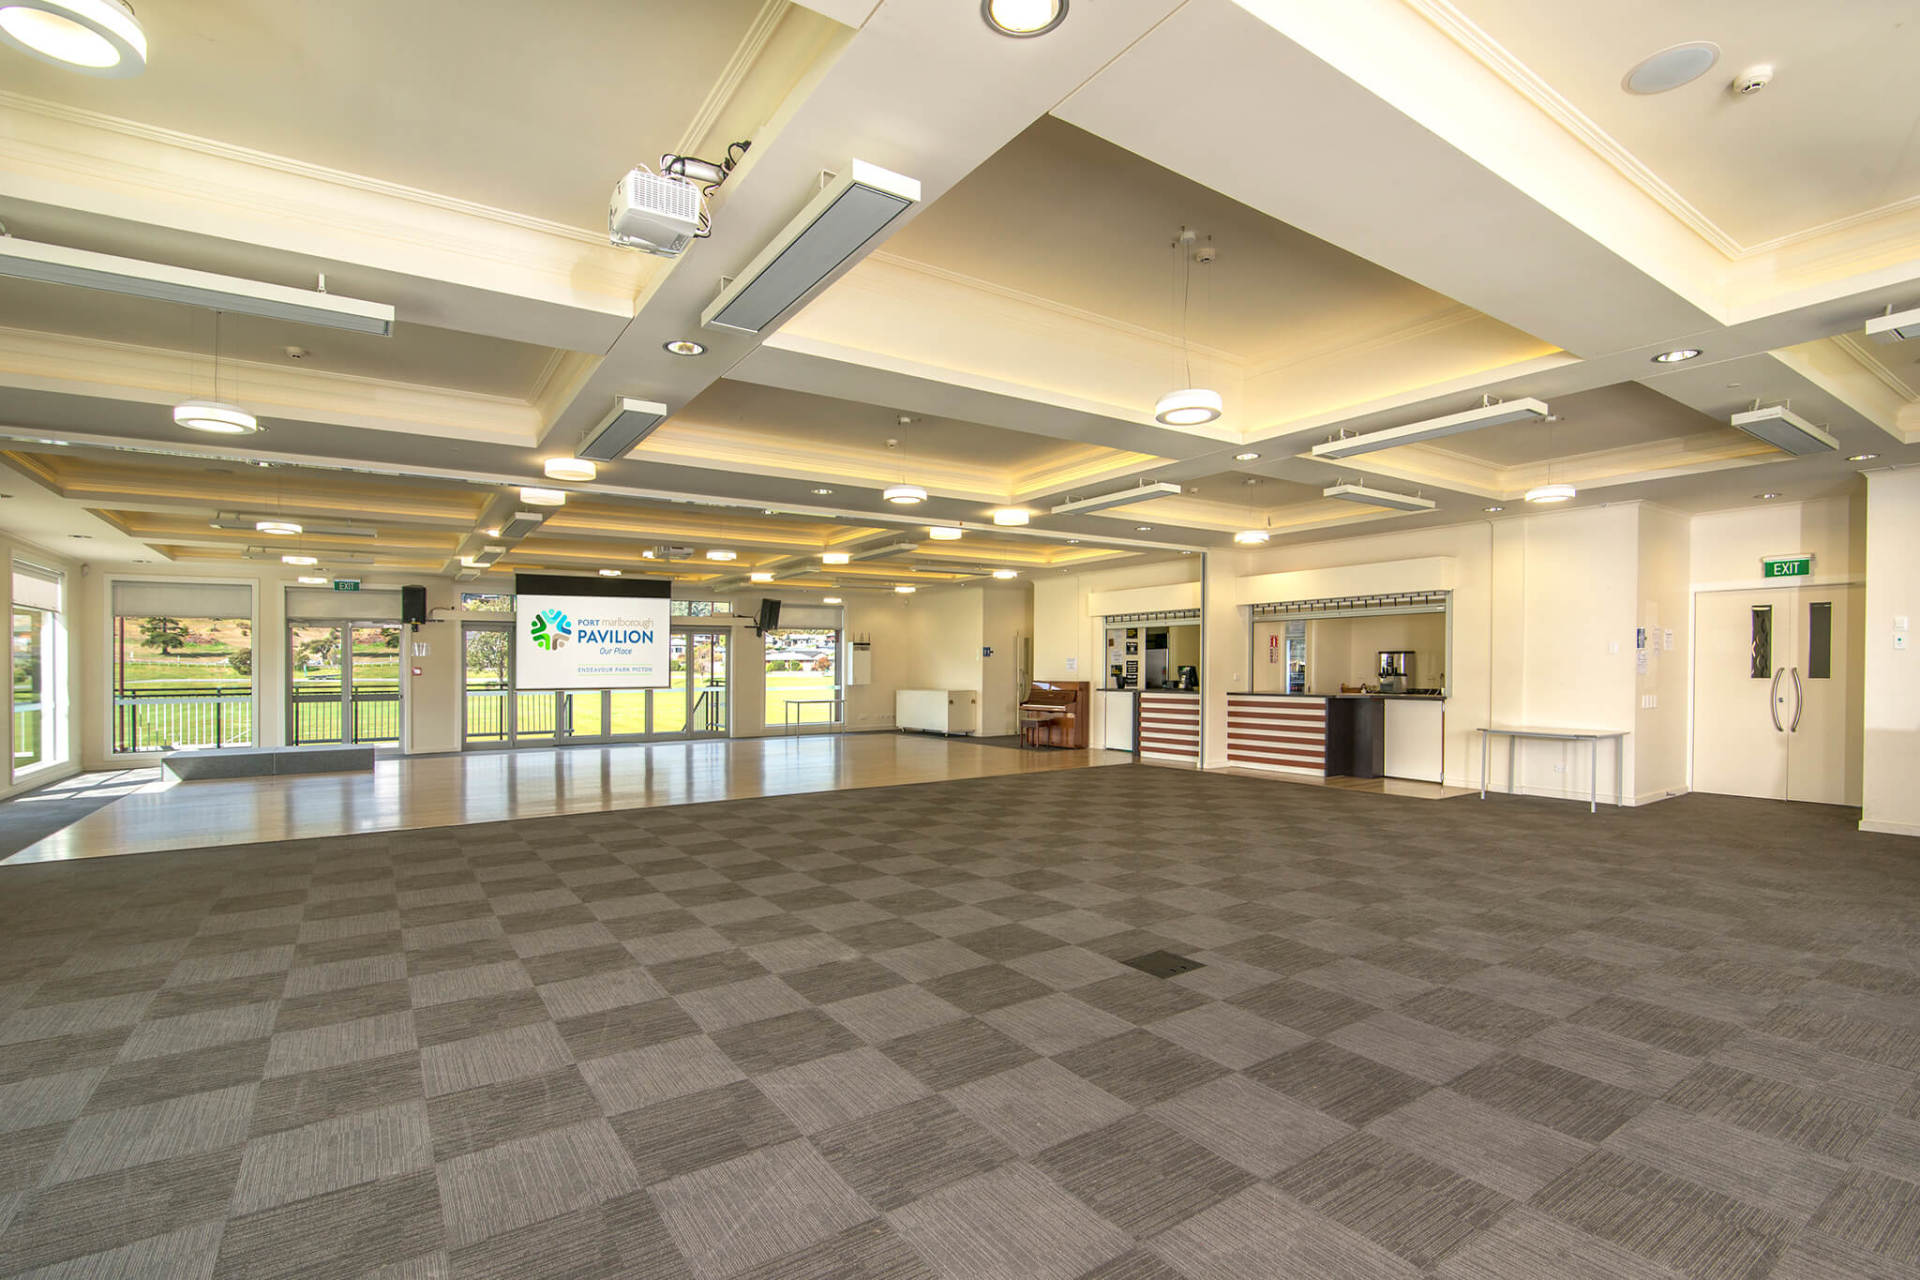 The Main Room at Endeavour Park Pavilion in Picton